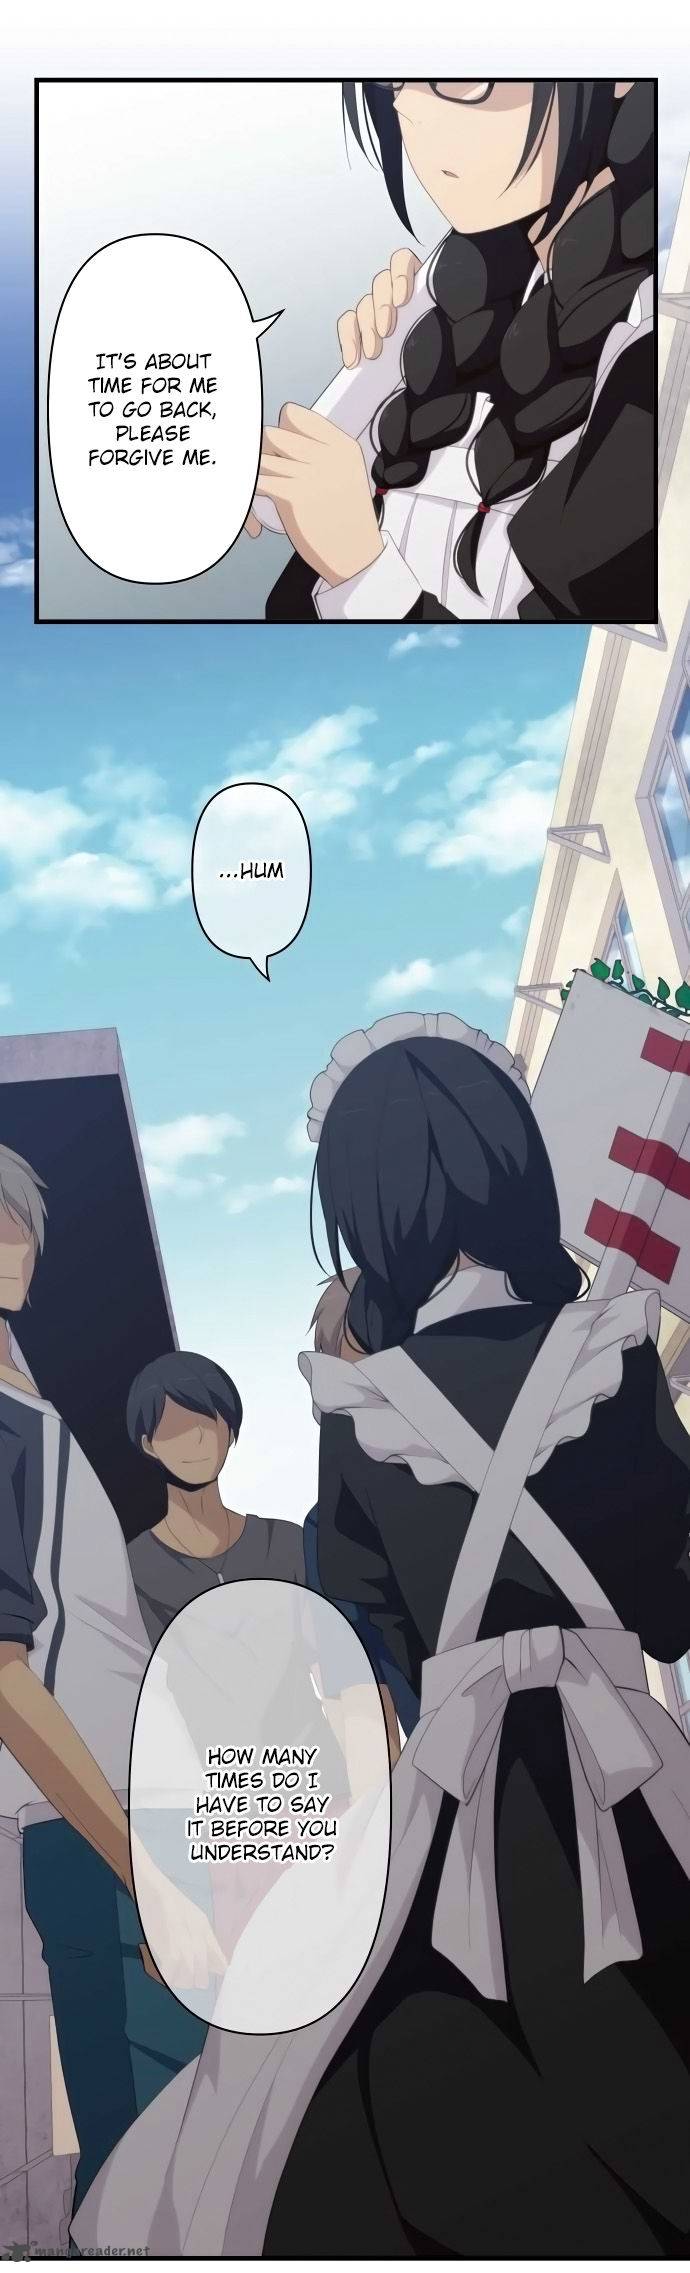 Relife 146 12